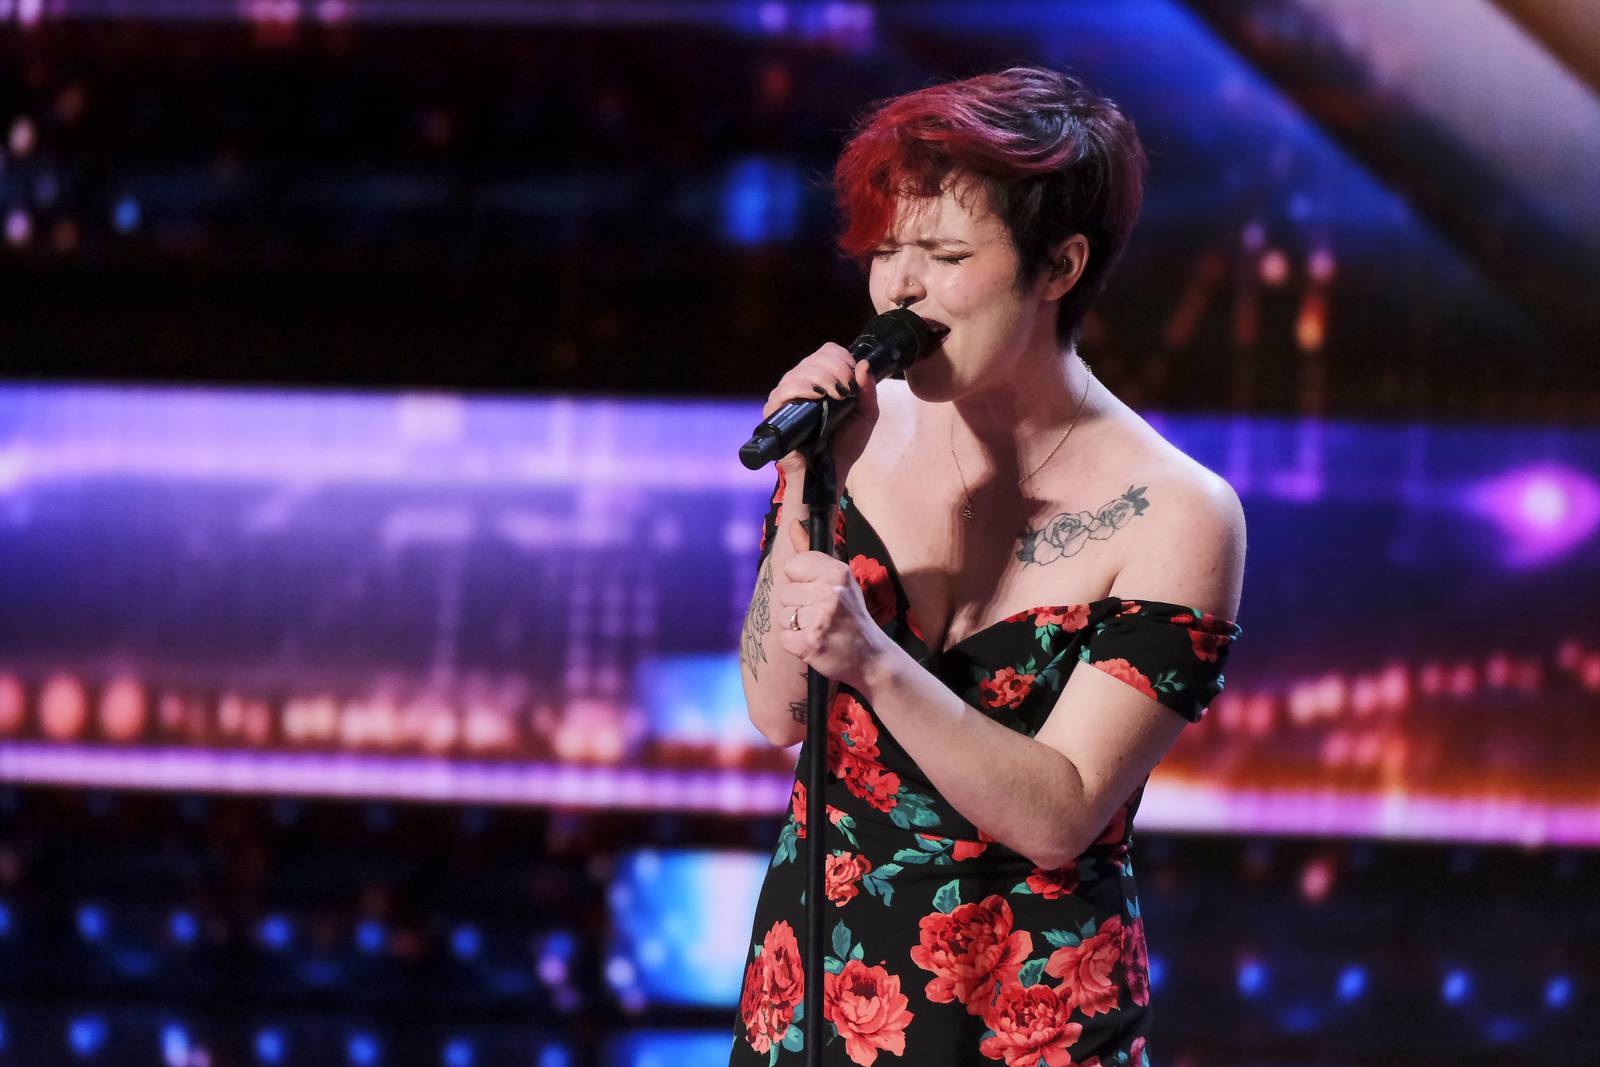 Local singer will be on ‘America’s Got Talent’ Tuesday night on Channel